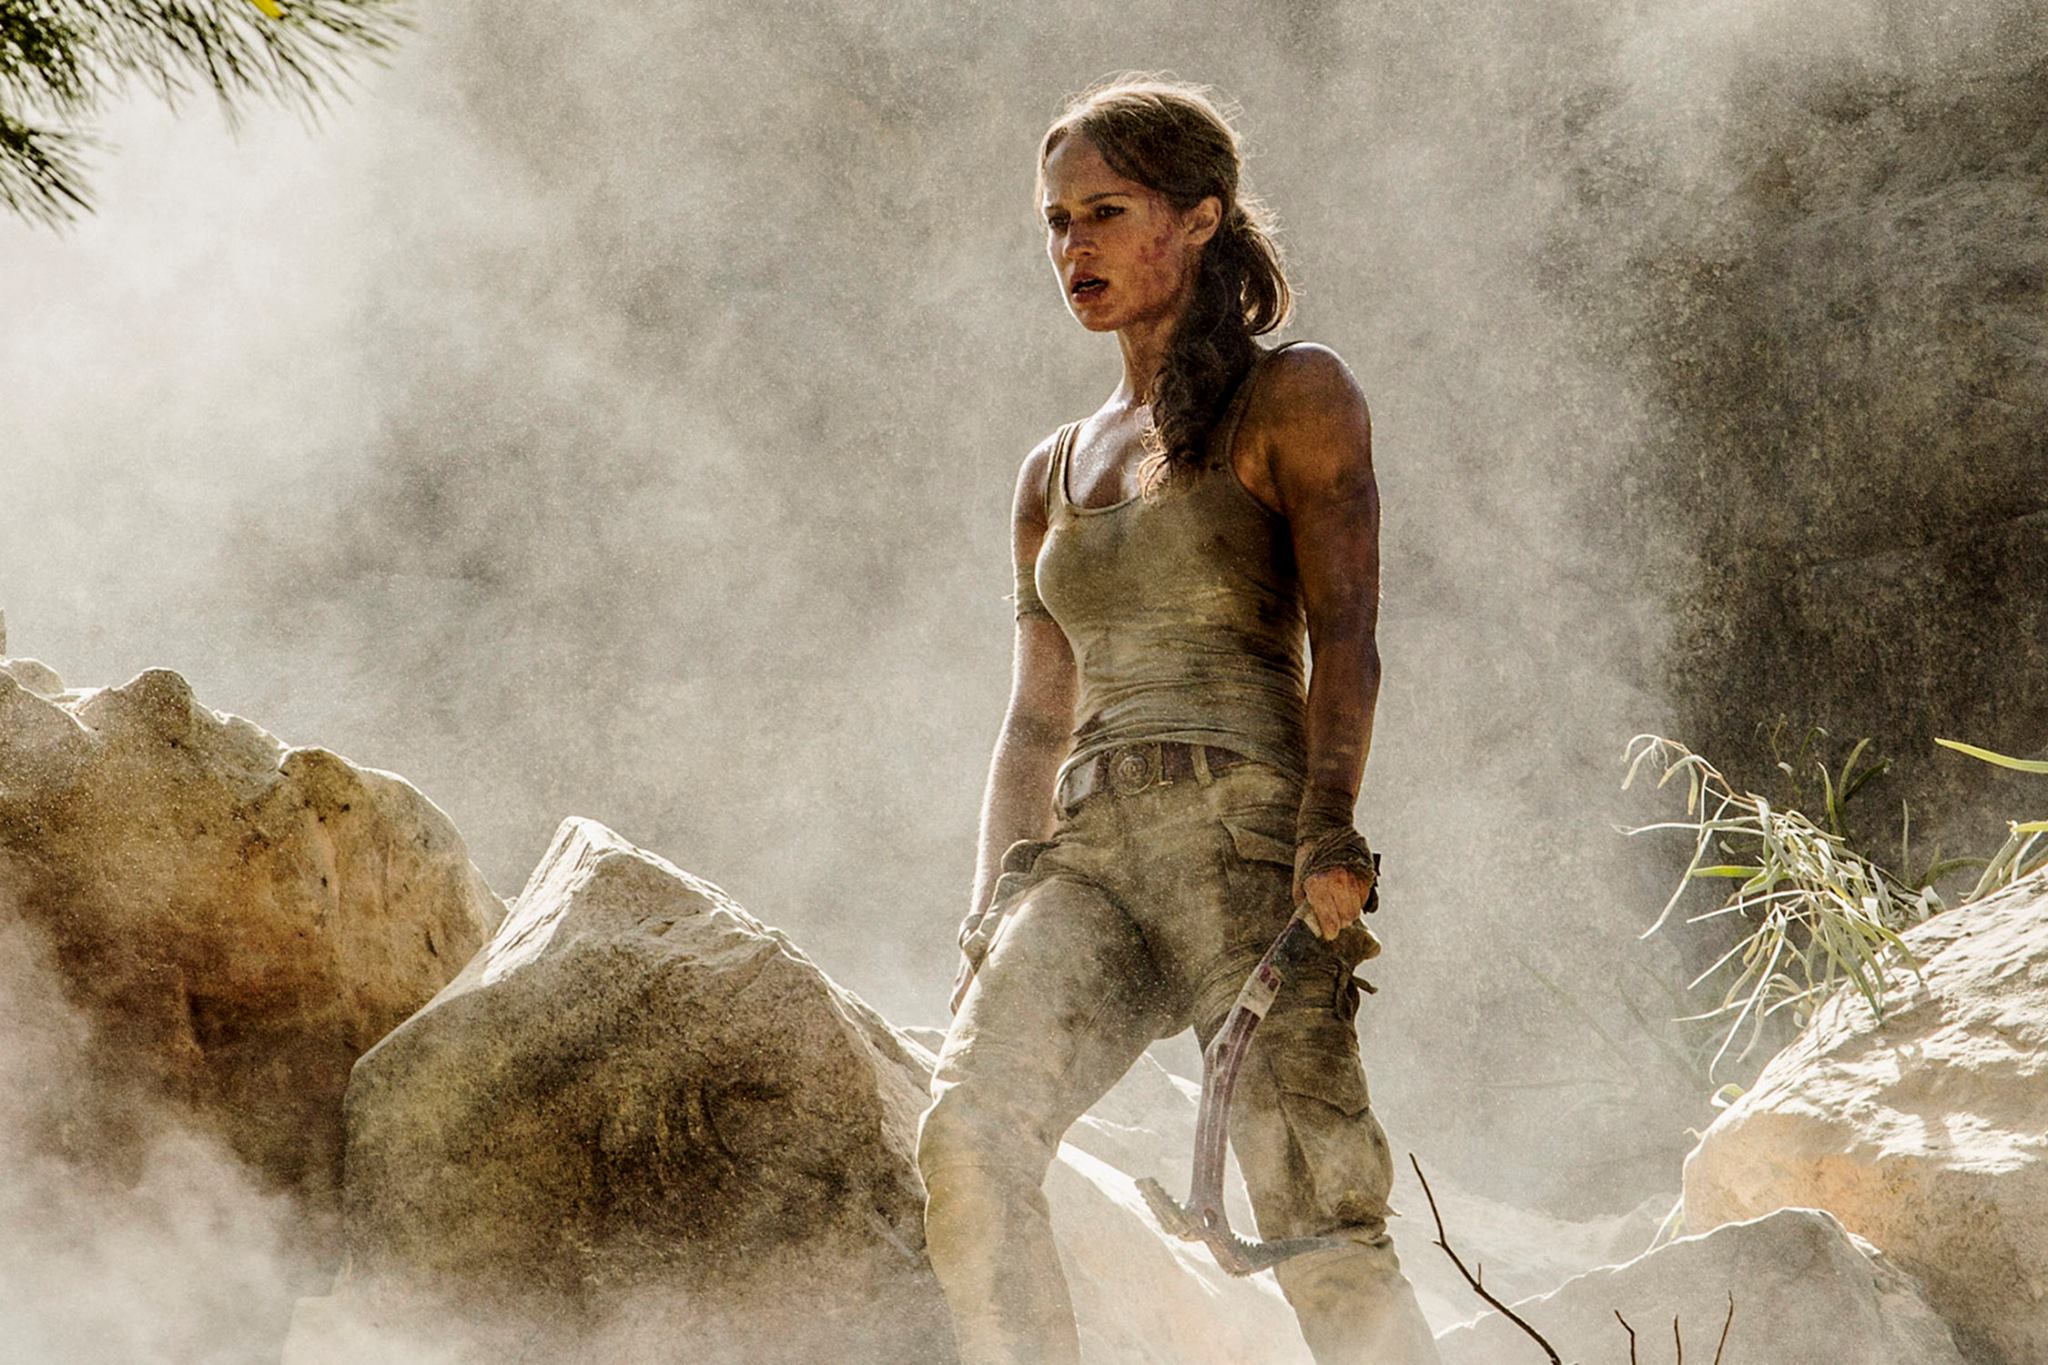  ALICIA VIKANDER as Lara Croft in Warner Bros. Pictures and Metro-Goldwyn-Mayer Pictures&rsquo; action adventure &ldquo;TOMB RAIDER,&rdquo; opening March 16, 2018. Photo by Ilzek Kitshoff 